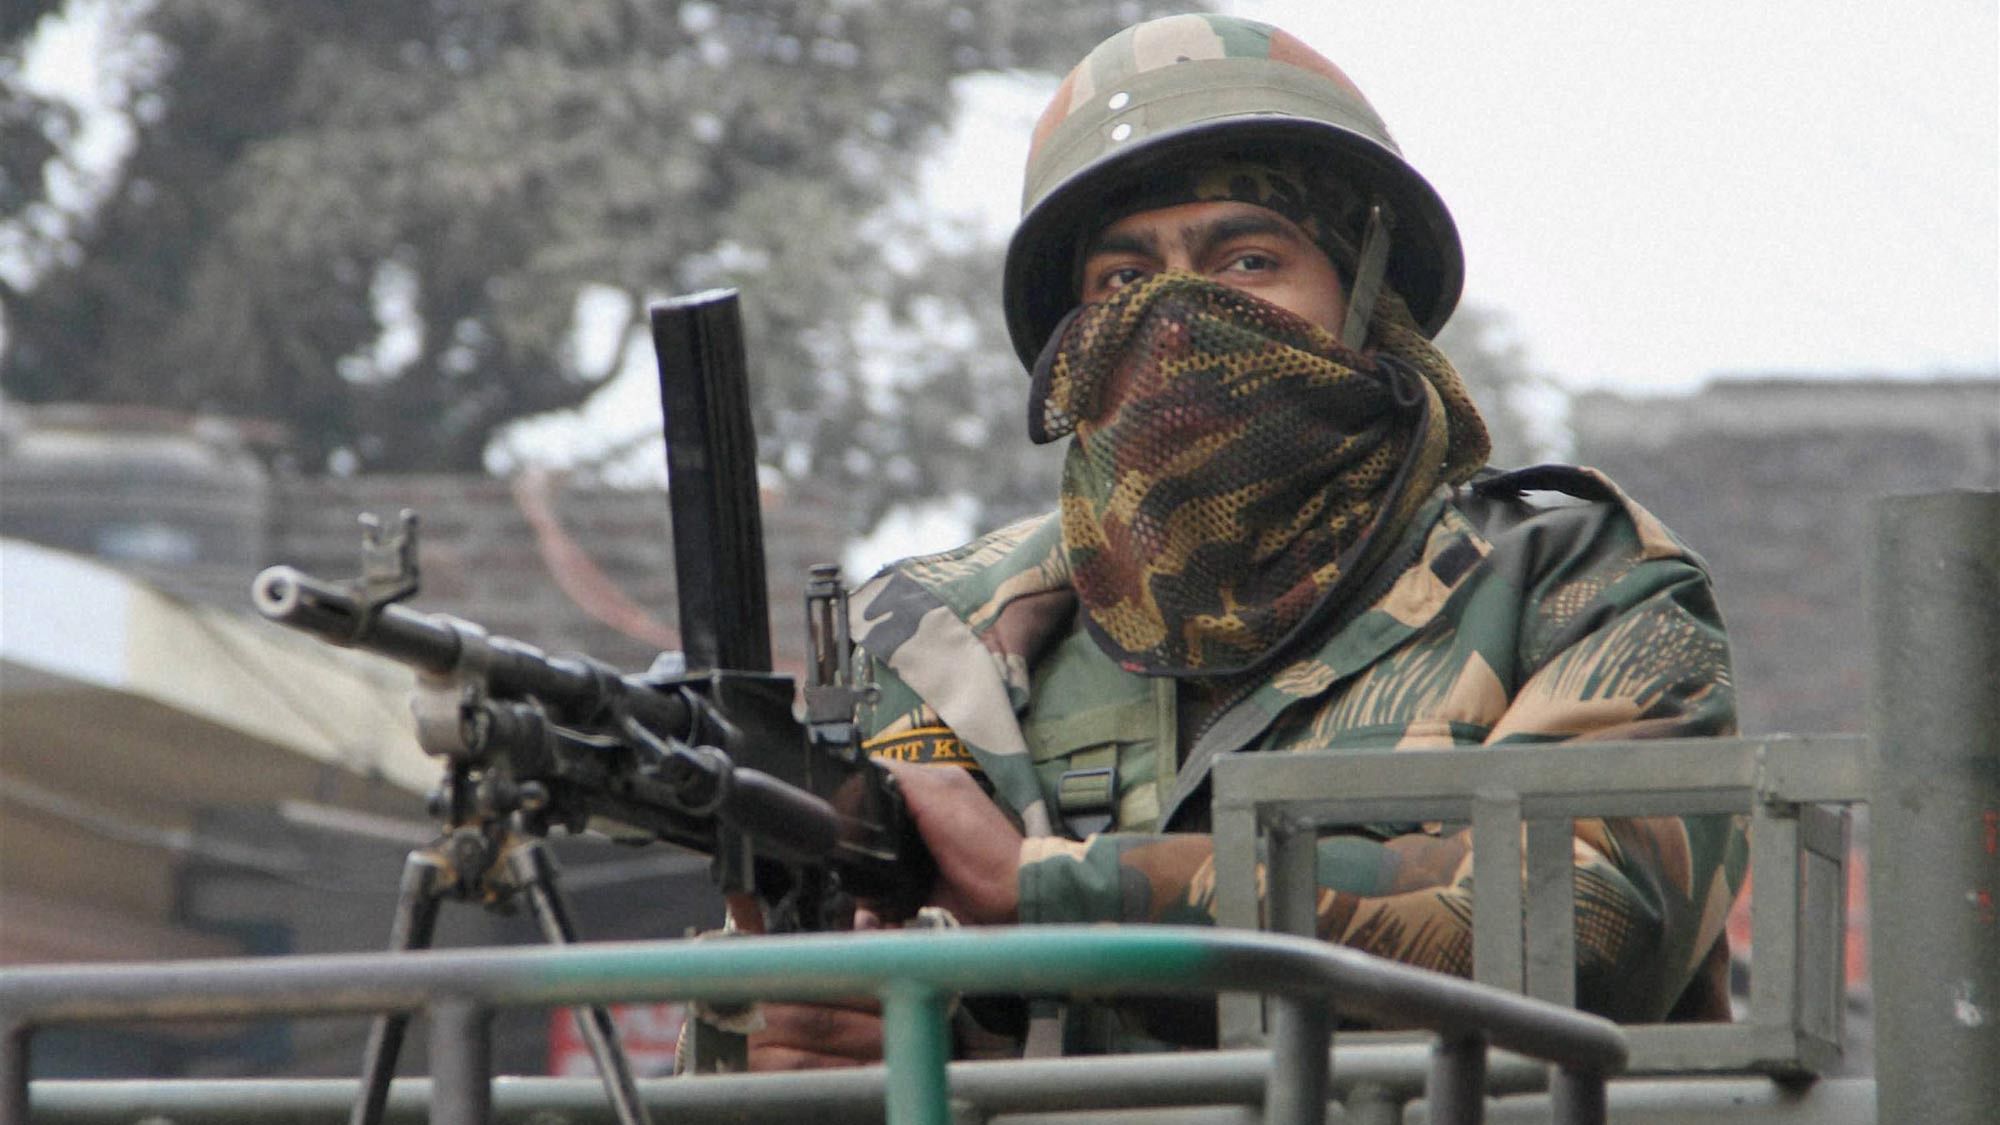 An army person guards during the operation against the militants at the Indian Air Force base in Pathankot on Monday. (Photo: PTI)